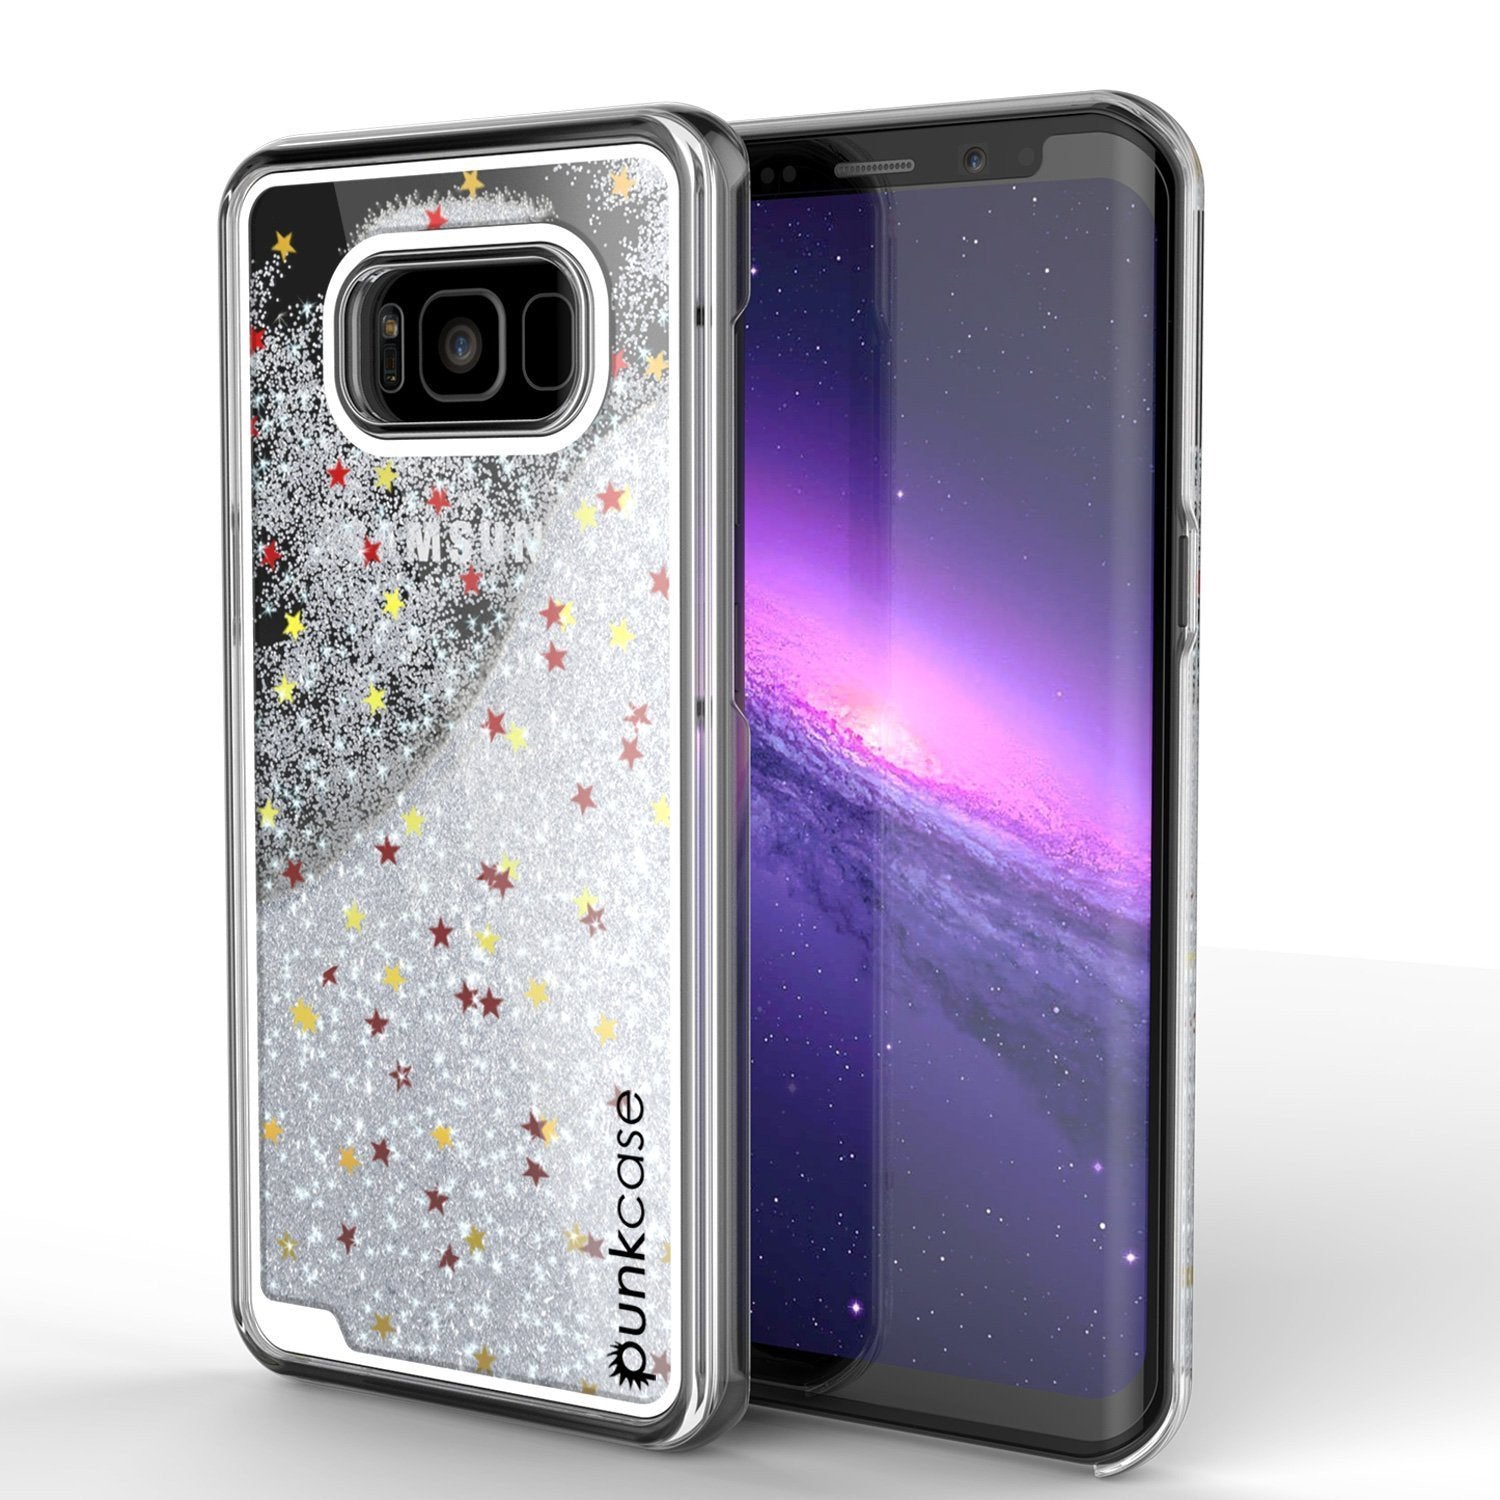 S8 Plus Case, Punkcase Liquid Silver Series Protective Dual Layer Floating Glitter Cover